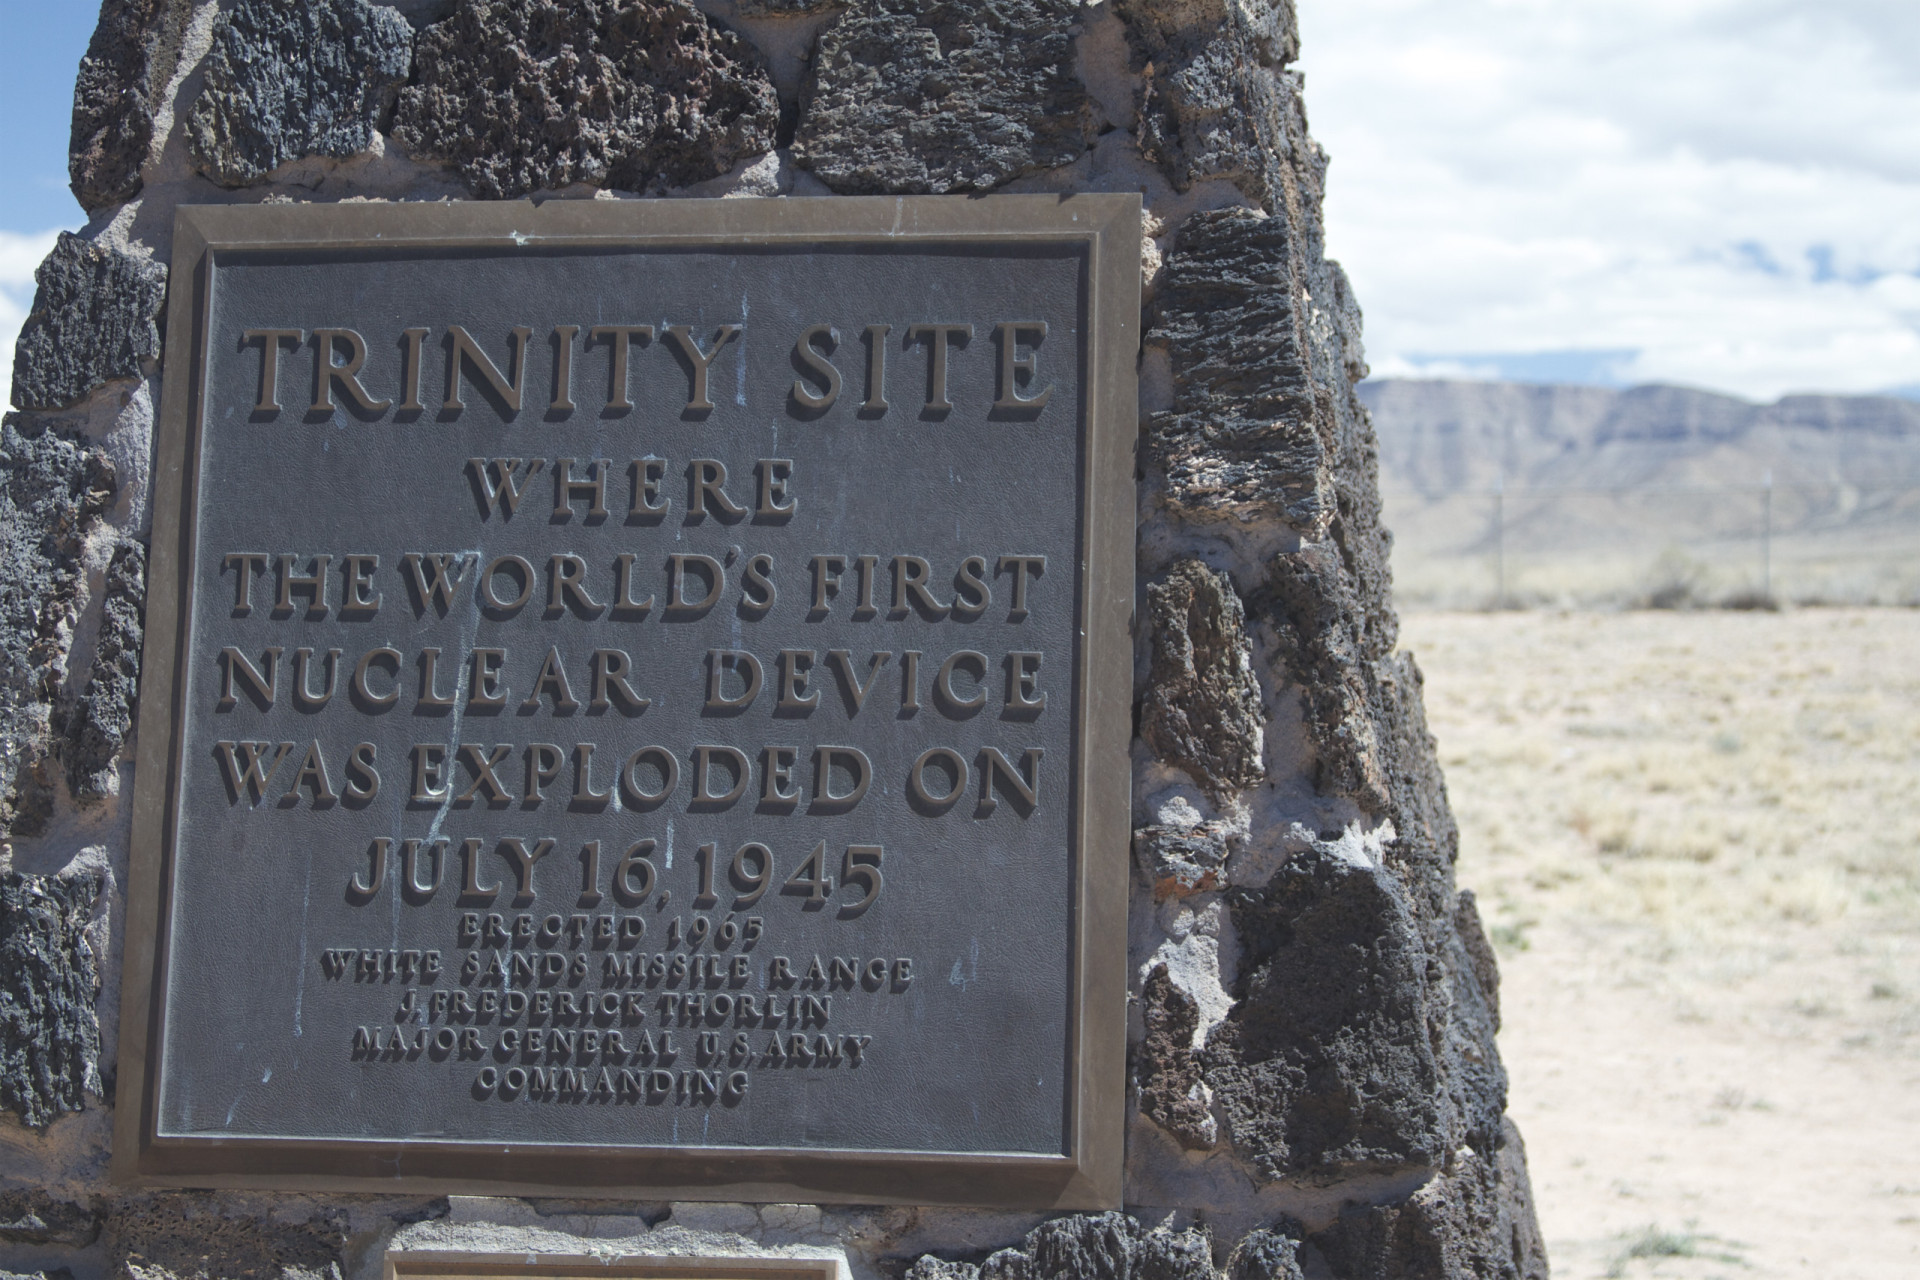 <p>On July 16, 1945, the first nuclear explosion occurred a few hundred miles south of Los Alamos, New Mexico. Known as the Trinity test by <a href="https://www.starsinsider.com/lifestyle/560470/the-man-behind-the-movie-get-to-know-oppenheimer-the-father-of-the-atomic-bomb" rel="noopener">J. Robert Oppenheimer</a>, the director of the Los Alamos Laboratory, it was the start of the age of nuclear weapons. From that day until 1992, the US alone conducted more than 1,000 nuclear tests. And, perhaps surprisingly, many of the sites where these earth-shattering explosions took place can still be visited today.</p> <p>Intrigued? Click on to discover nuclear testing sites you can visit.</p><p>You may also like:<a href="https://www.starsinsider.com/n/168788?utm_source=msn.com&utm_medium=display&utm_campaign=referral_description&utm_content=686881en-us"> 30 beautiful and single Hollywood celebrities</a></p>